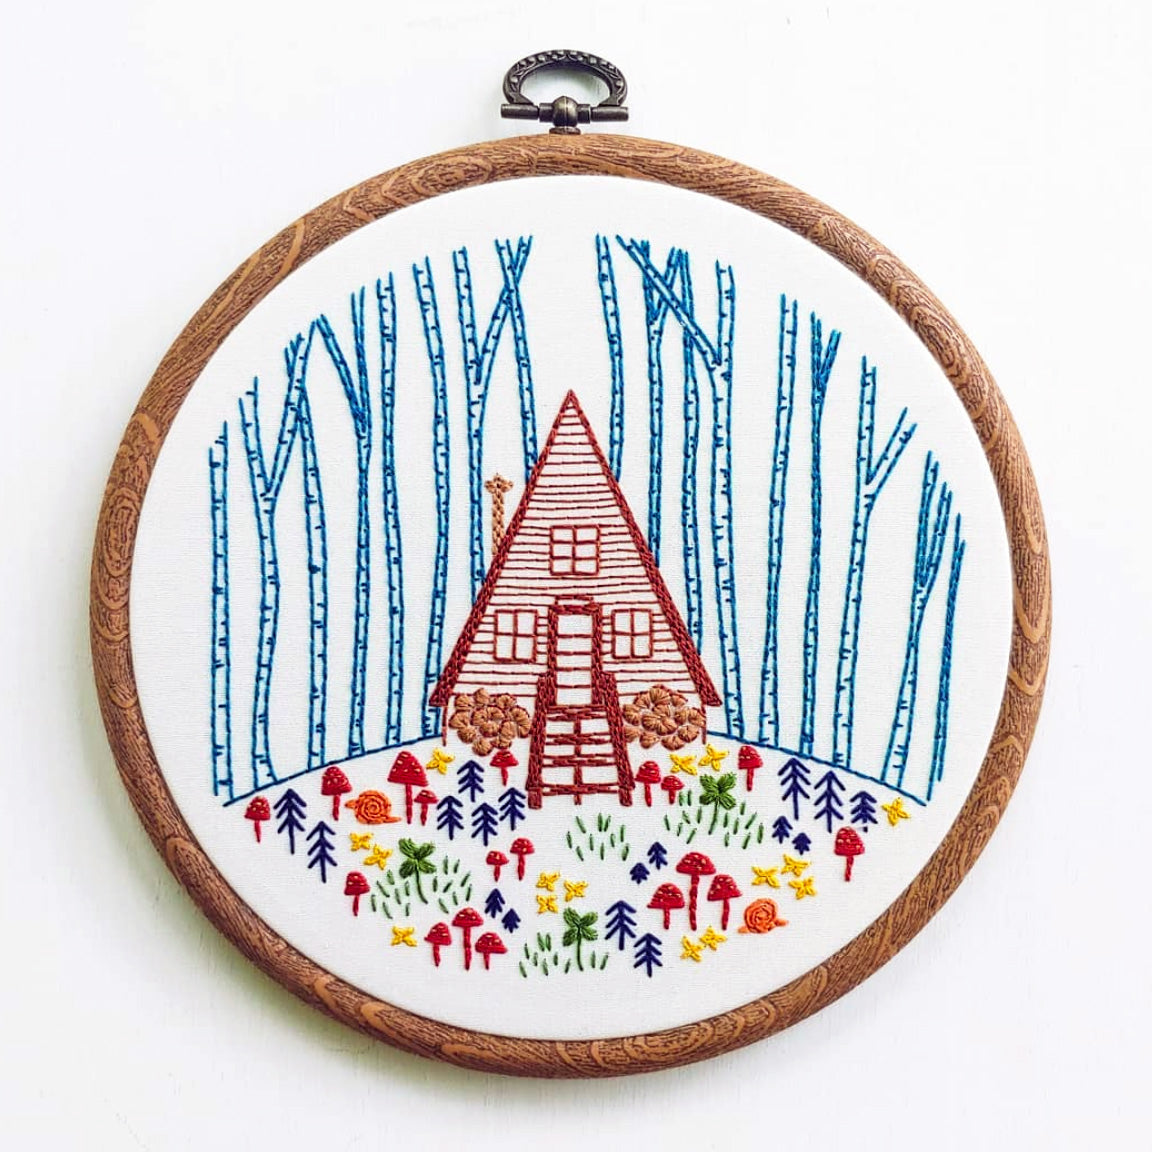 Cozy Cabin Hand Embroidery Kit